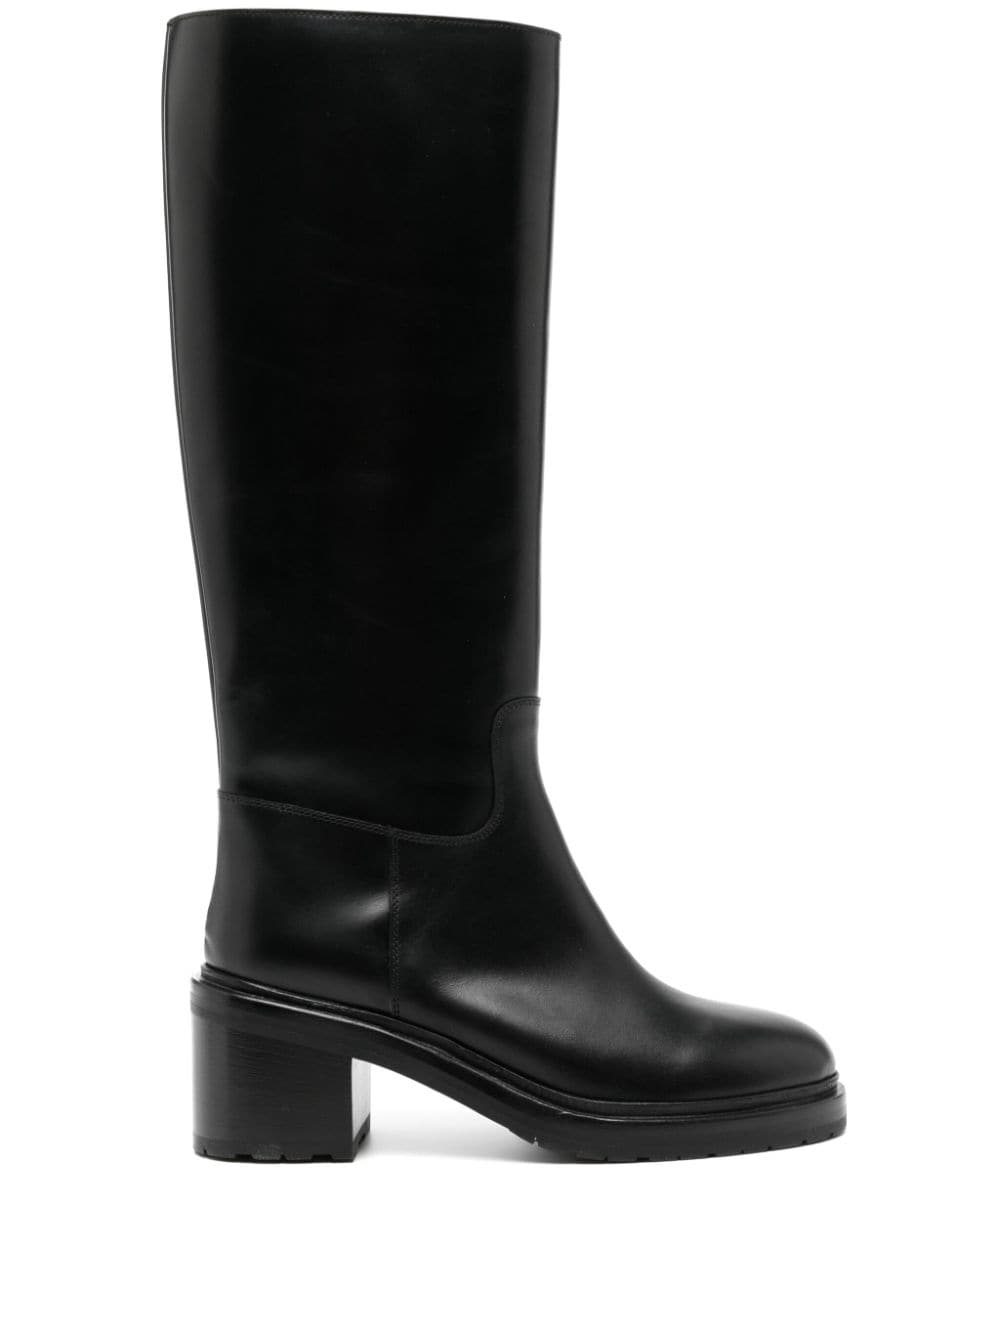 75mm knee-high riding boots